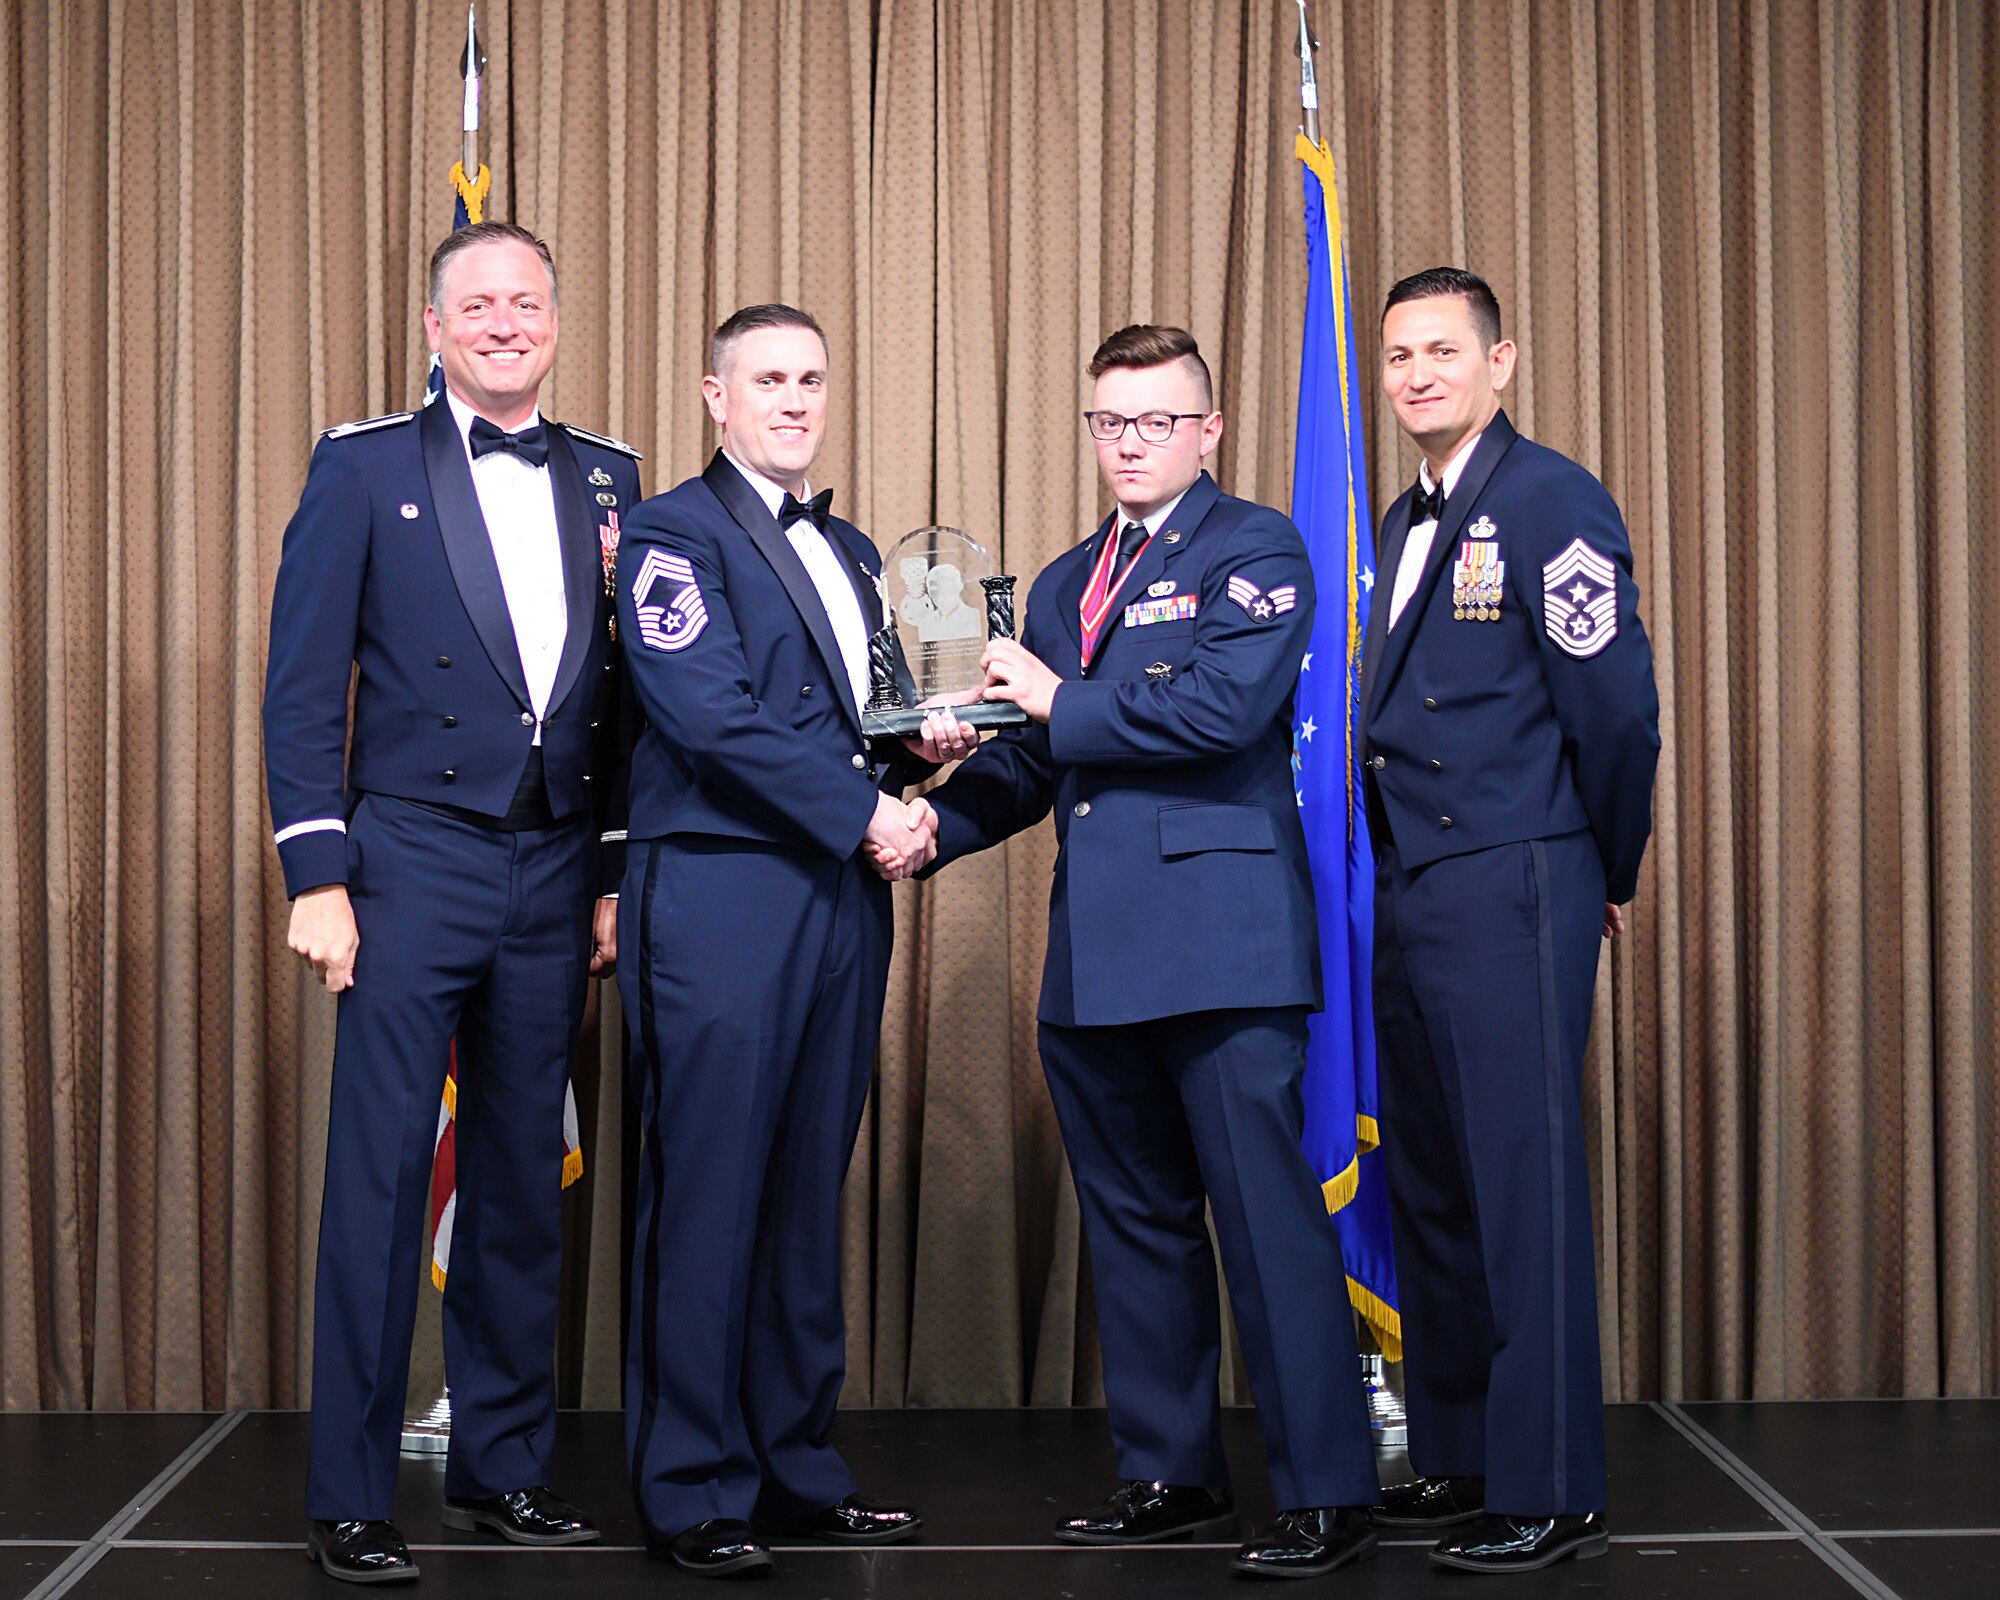 CMSgt David Allshouse, Chief's Group representative, presents John L. Levitow Award to SrA Maxwell Stebbins, Etchberger Airman Leadership School graduate, June 20, 2019, on Grand Forks Air Force Base, North Dakota. ALS graduation is the culmination of the first level of the Enlisted Professional Military Education continuum directed toward preparing upcoming noncommissioned officers with leadership skills for their careers. (U.S. Air Force photo by Senior Airman Elijaih Tiggs)